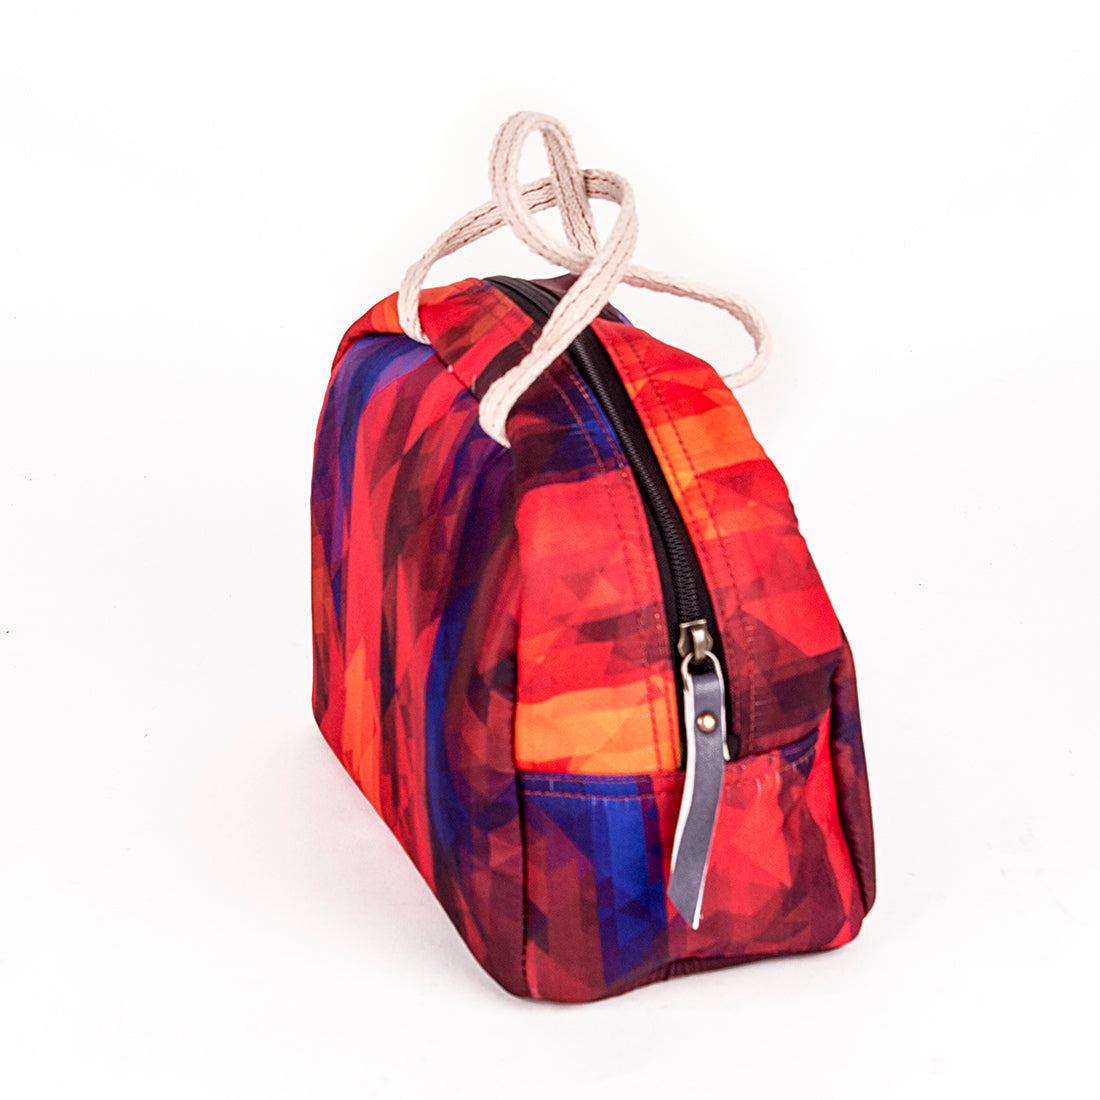 Tiffin- Lunch Bag-Red Hues 23